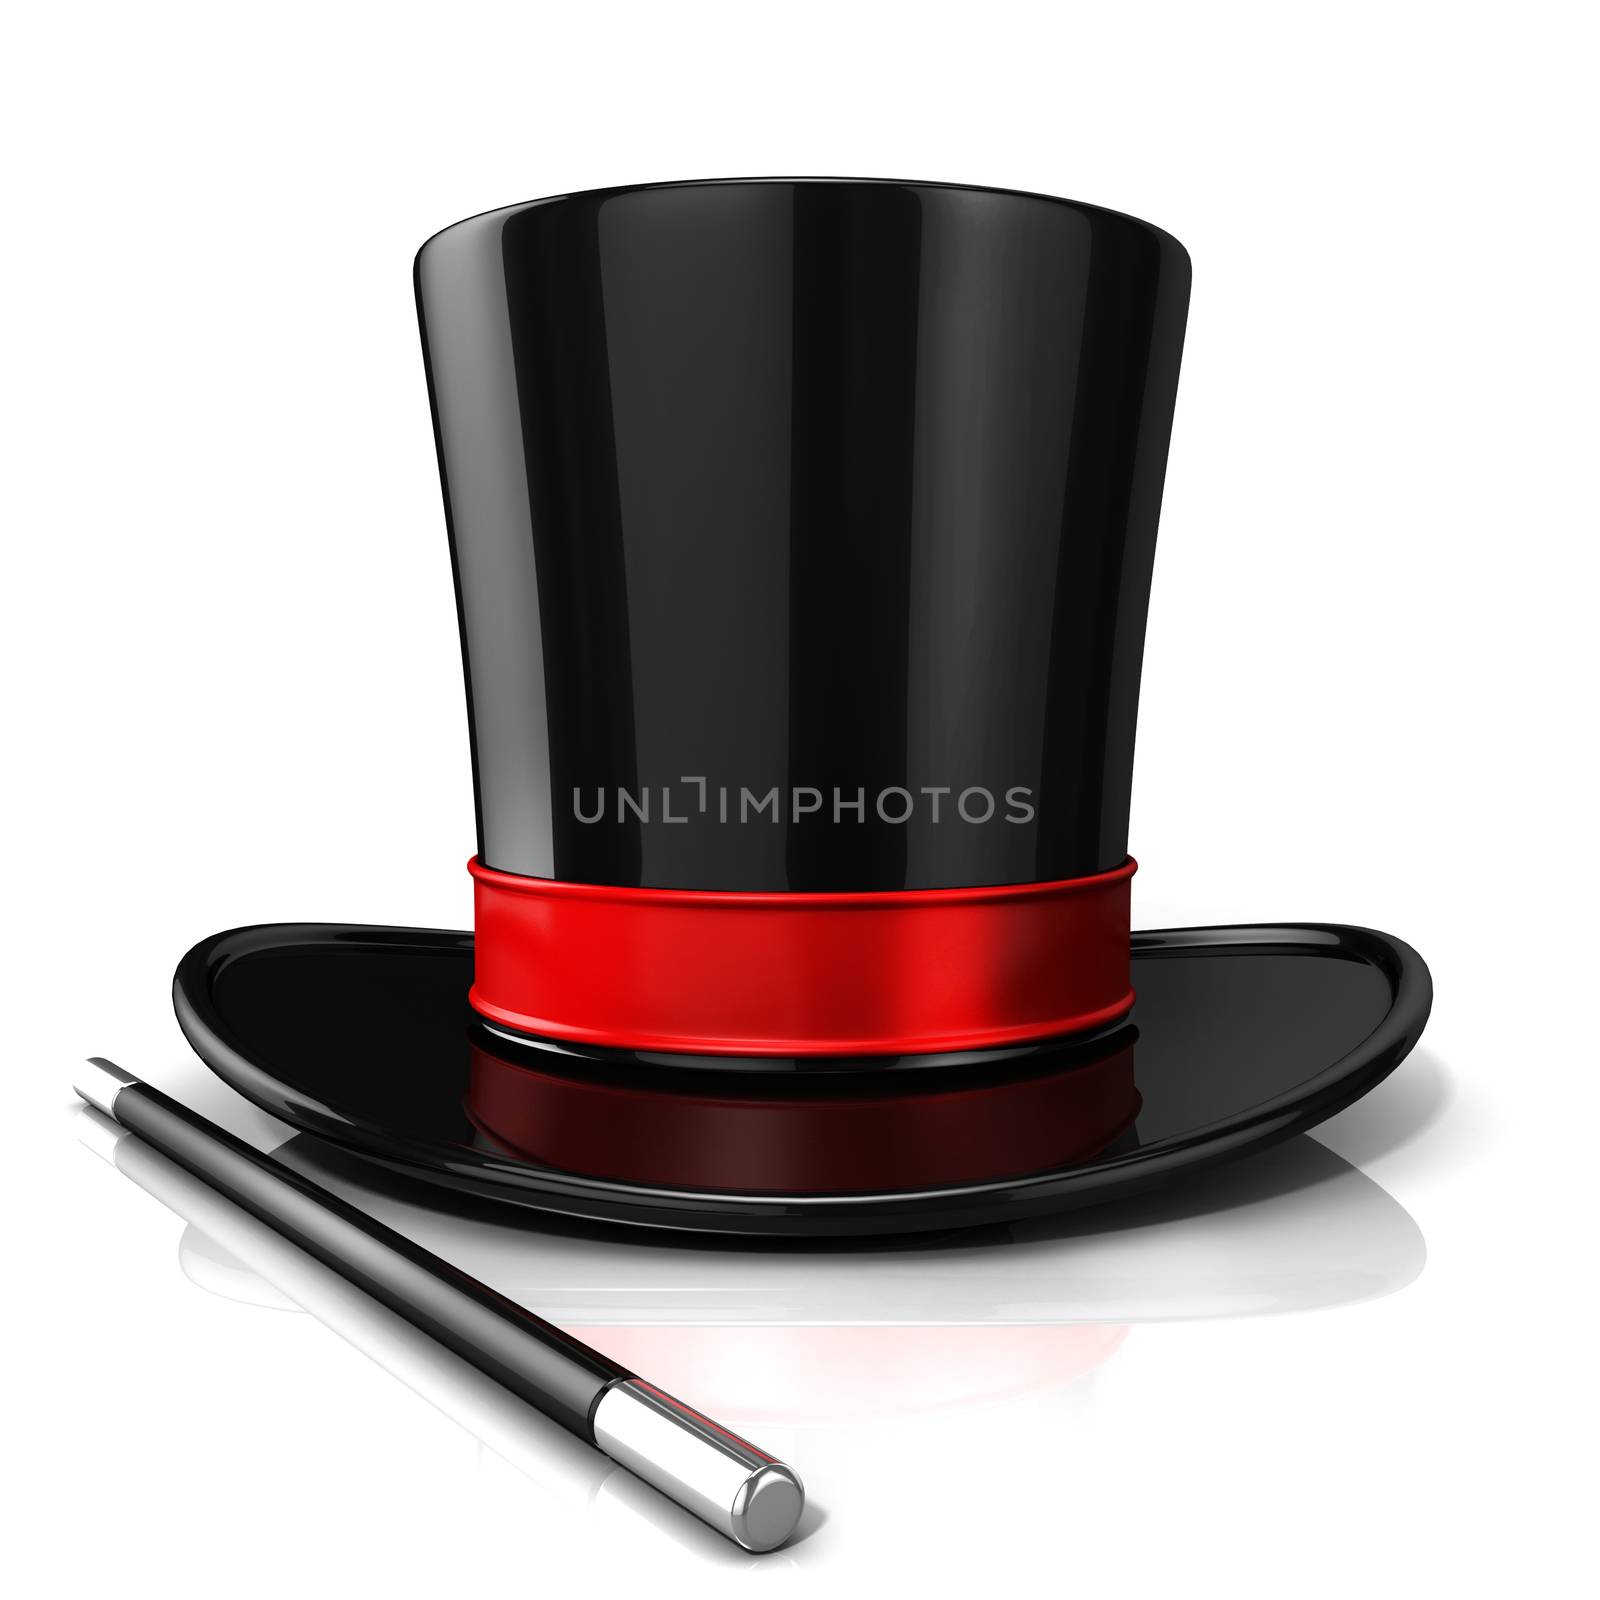 Magic hat and wand, 3D render isolated on white background. Front view